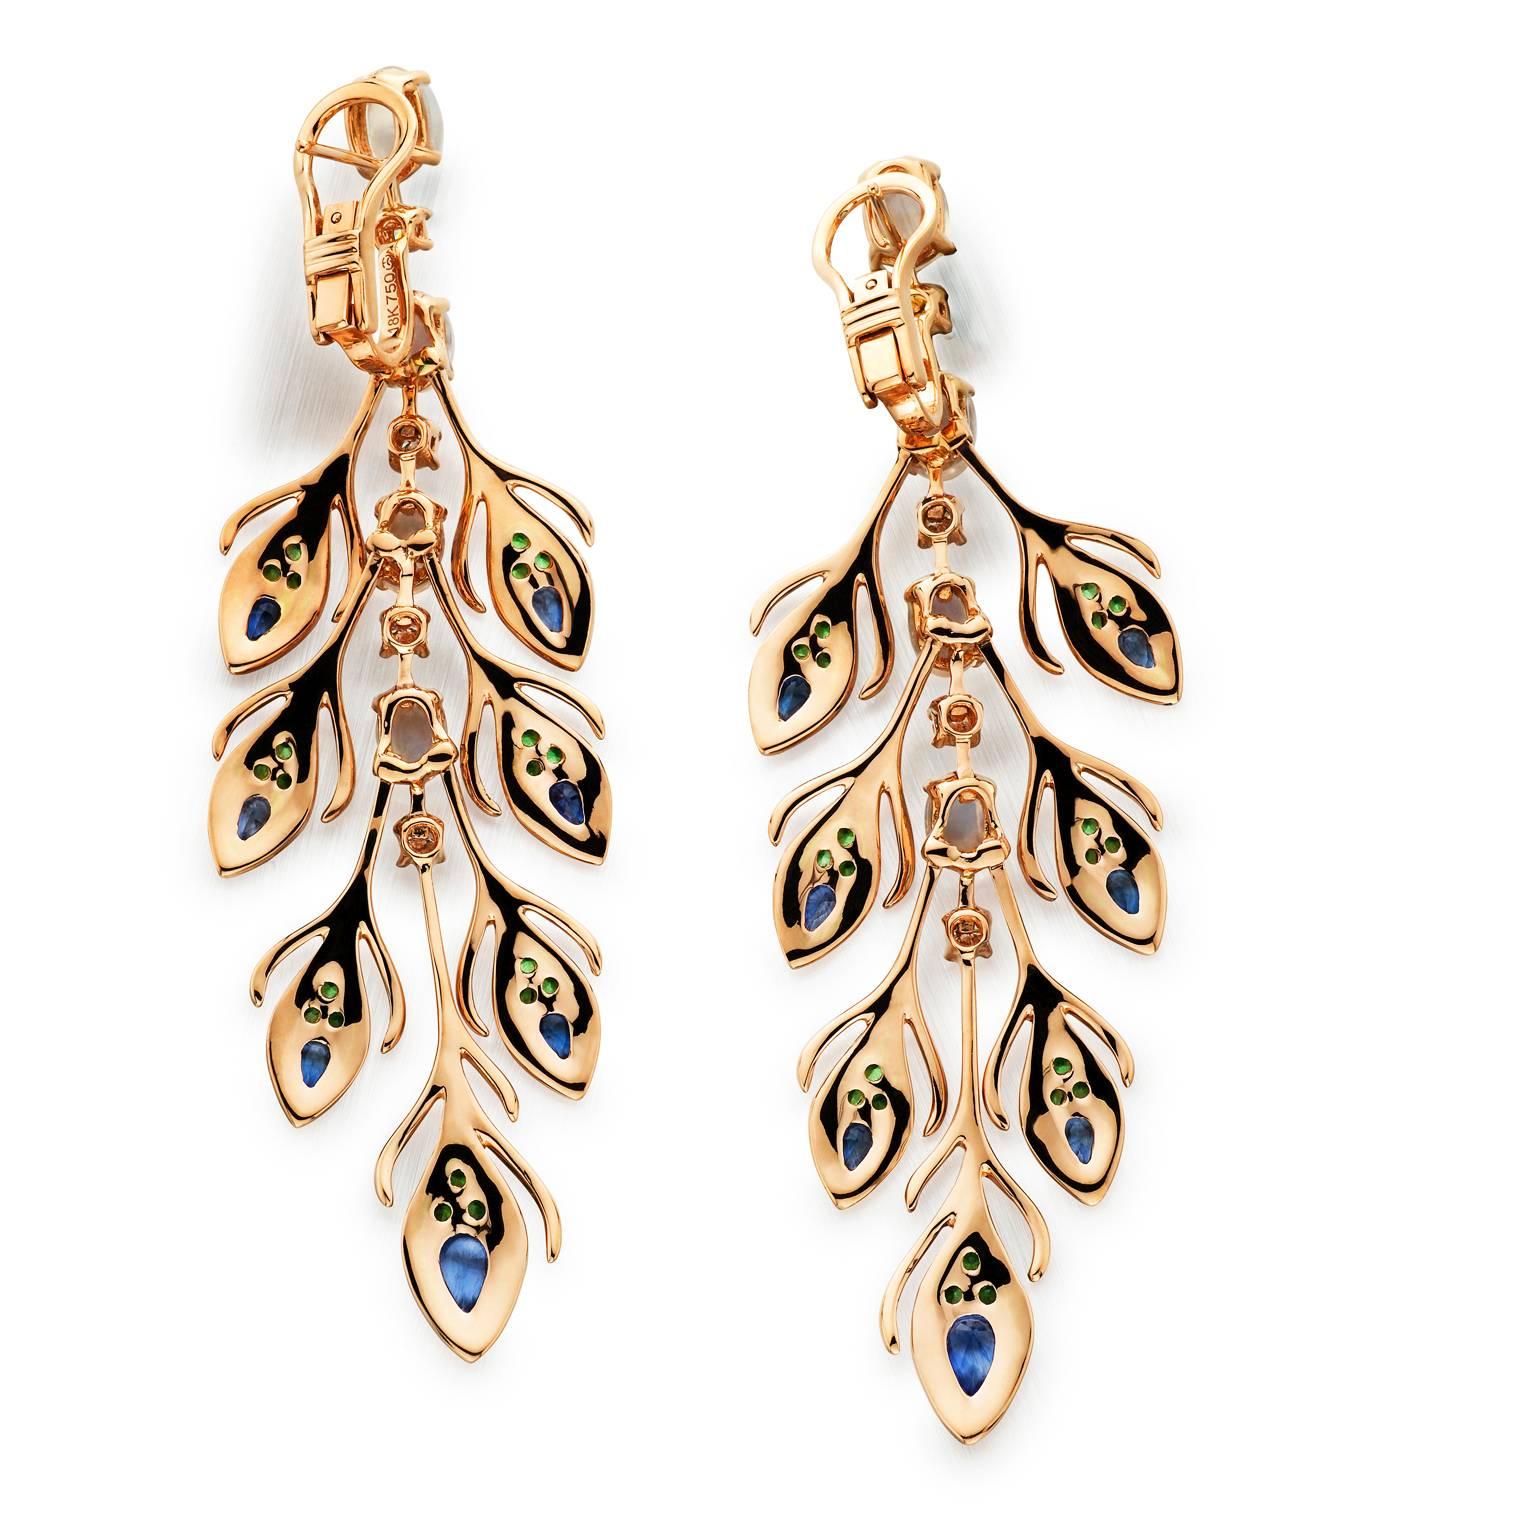 The Peacock’s rain dance when it spreads it’s feathers is one of the most eye catching scenes. These 18k rose gold peacock style dangle earrings are sure to draw attention. Featuring a beautiful combination of green garnet, blue sapphire, moonstone